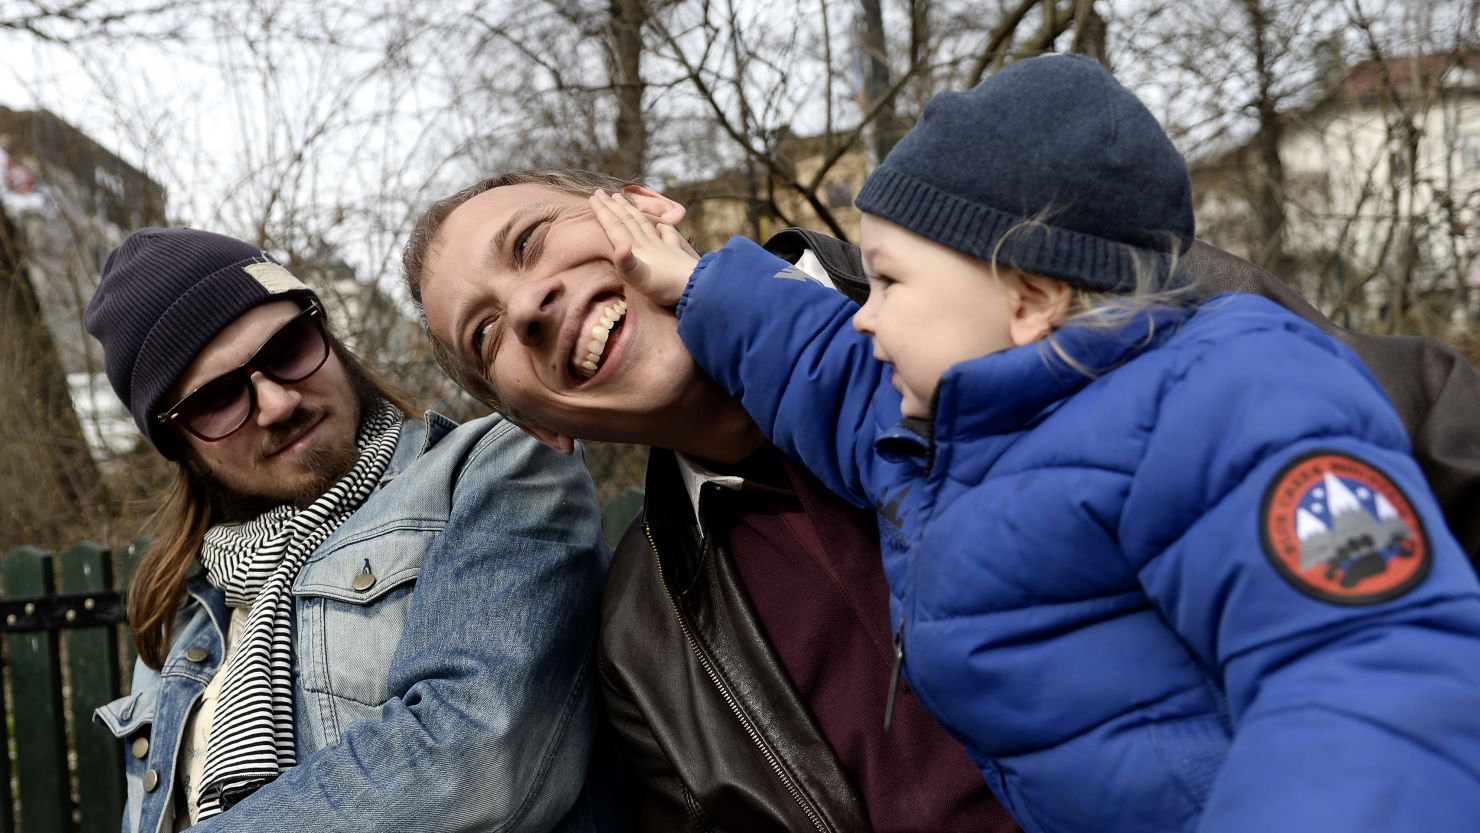 Anders Veide looks on as his friend Set Moklint plays with his son Wilhelm during a paternity leave outing at a park in Stockholm on April 24, 2013.